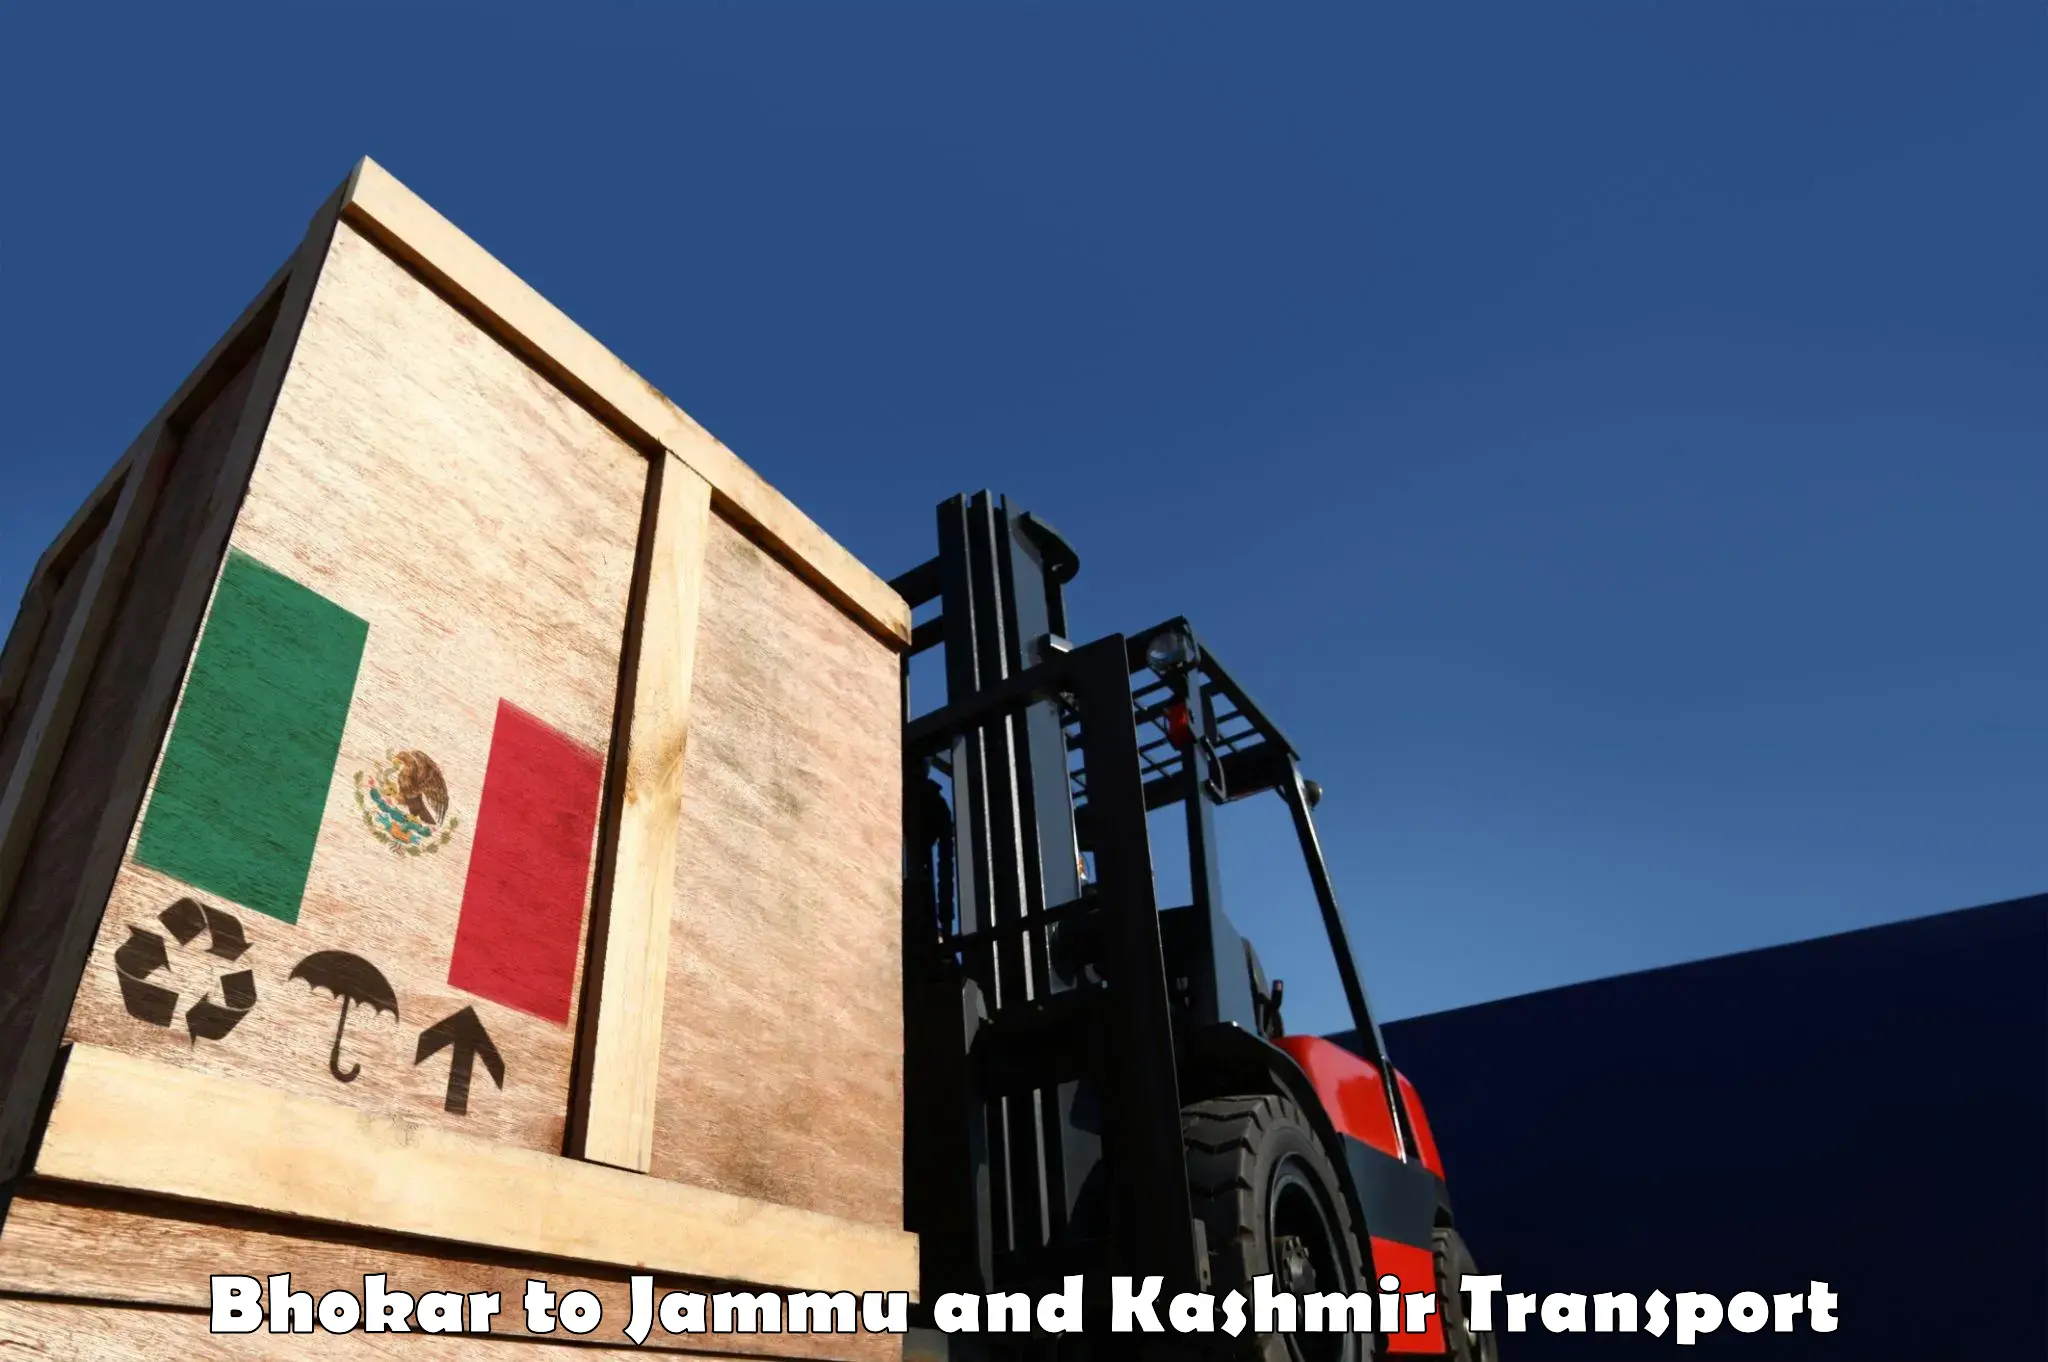 Container transportation services Bhokar to Jammu and Kashmir